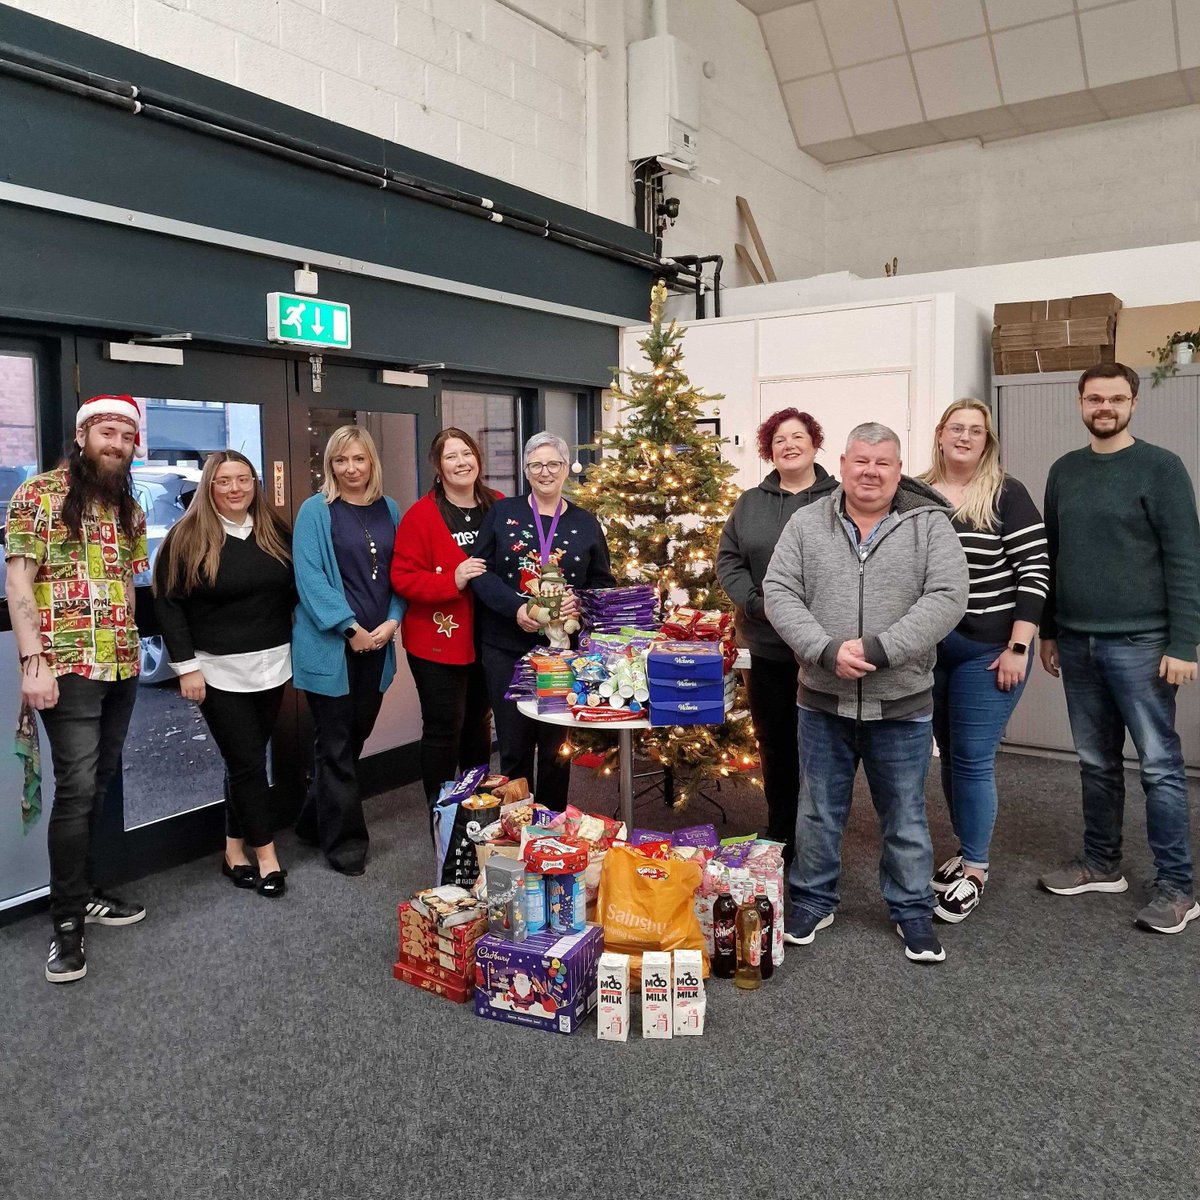 We had the pleasure of hosting Joanne & Billy from @NiTogether in our office. Our dedicated team has been actively gathering Christmas food contributions for 'In This Together'. Thank you to everyone who has donated and we hope all those receiving their treats enjoy them 🎄🎁🎅